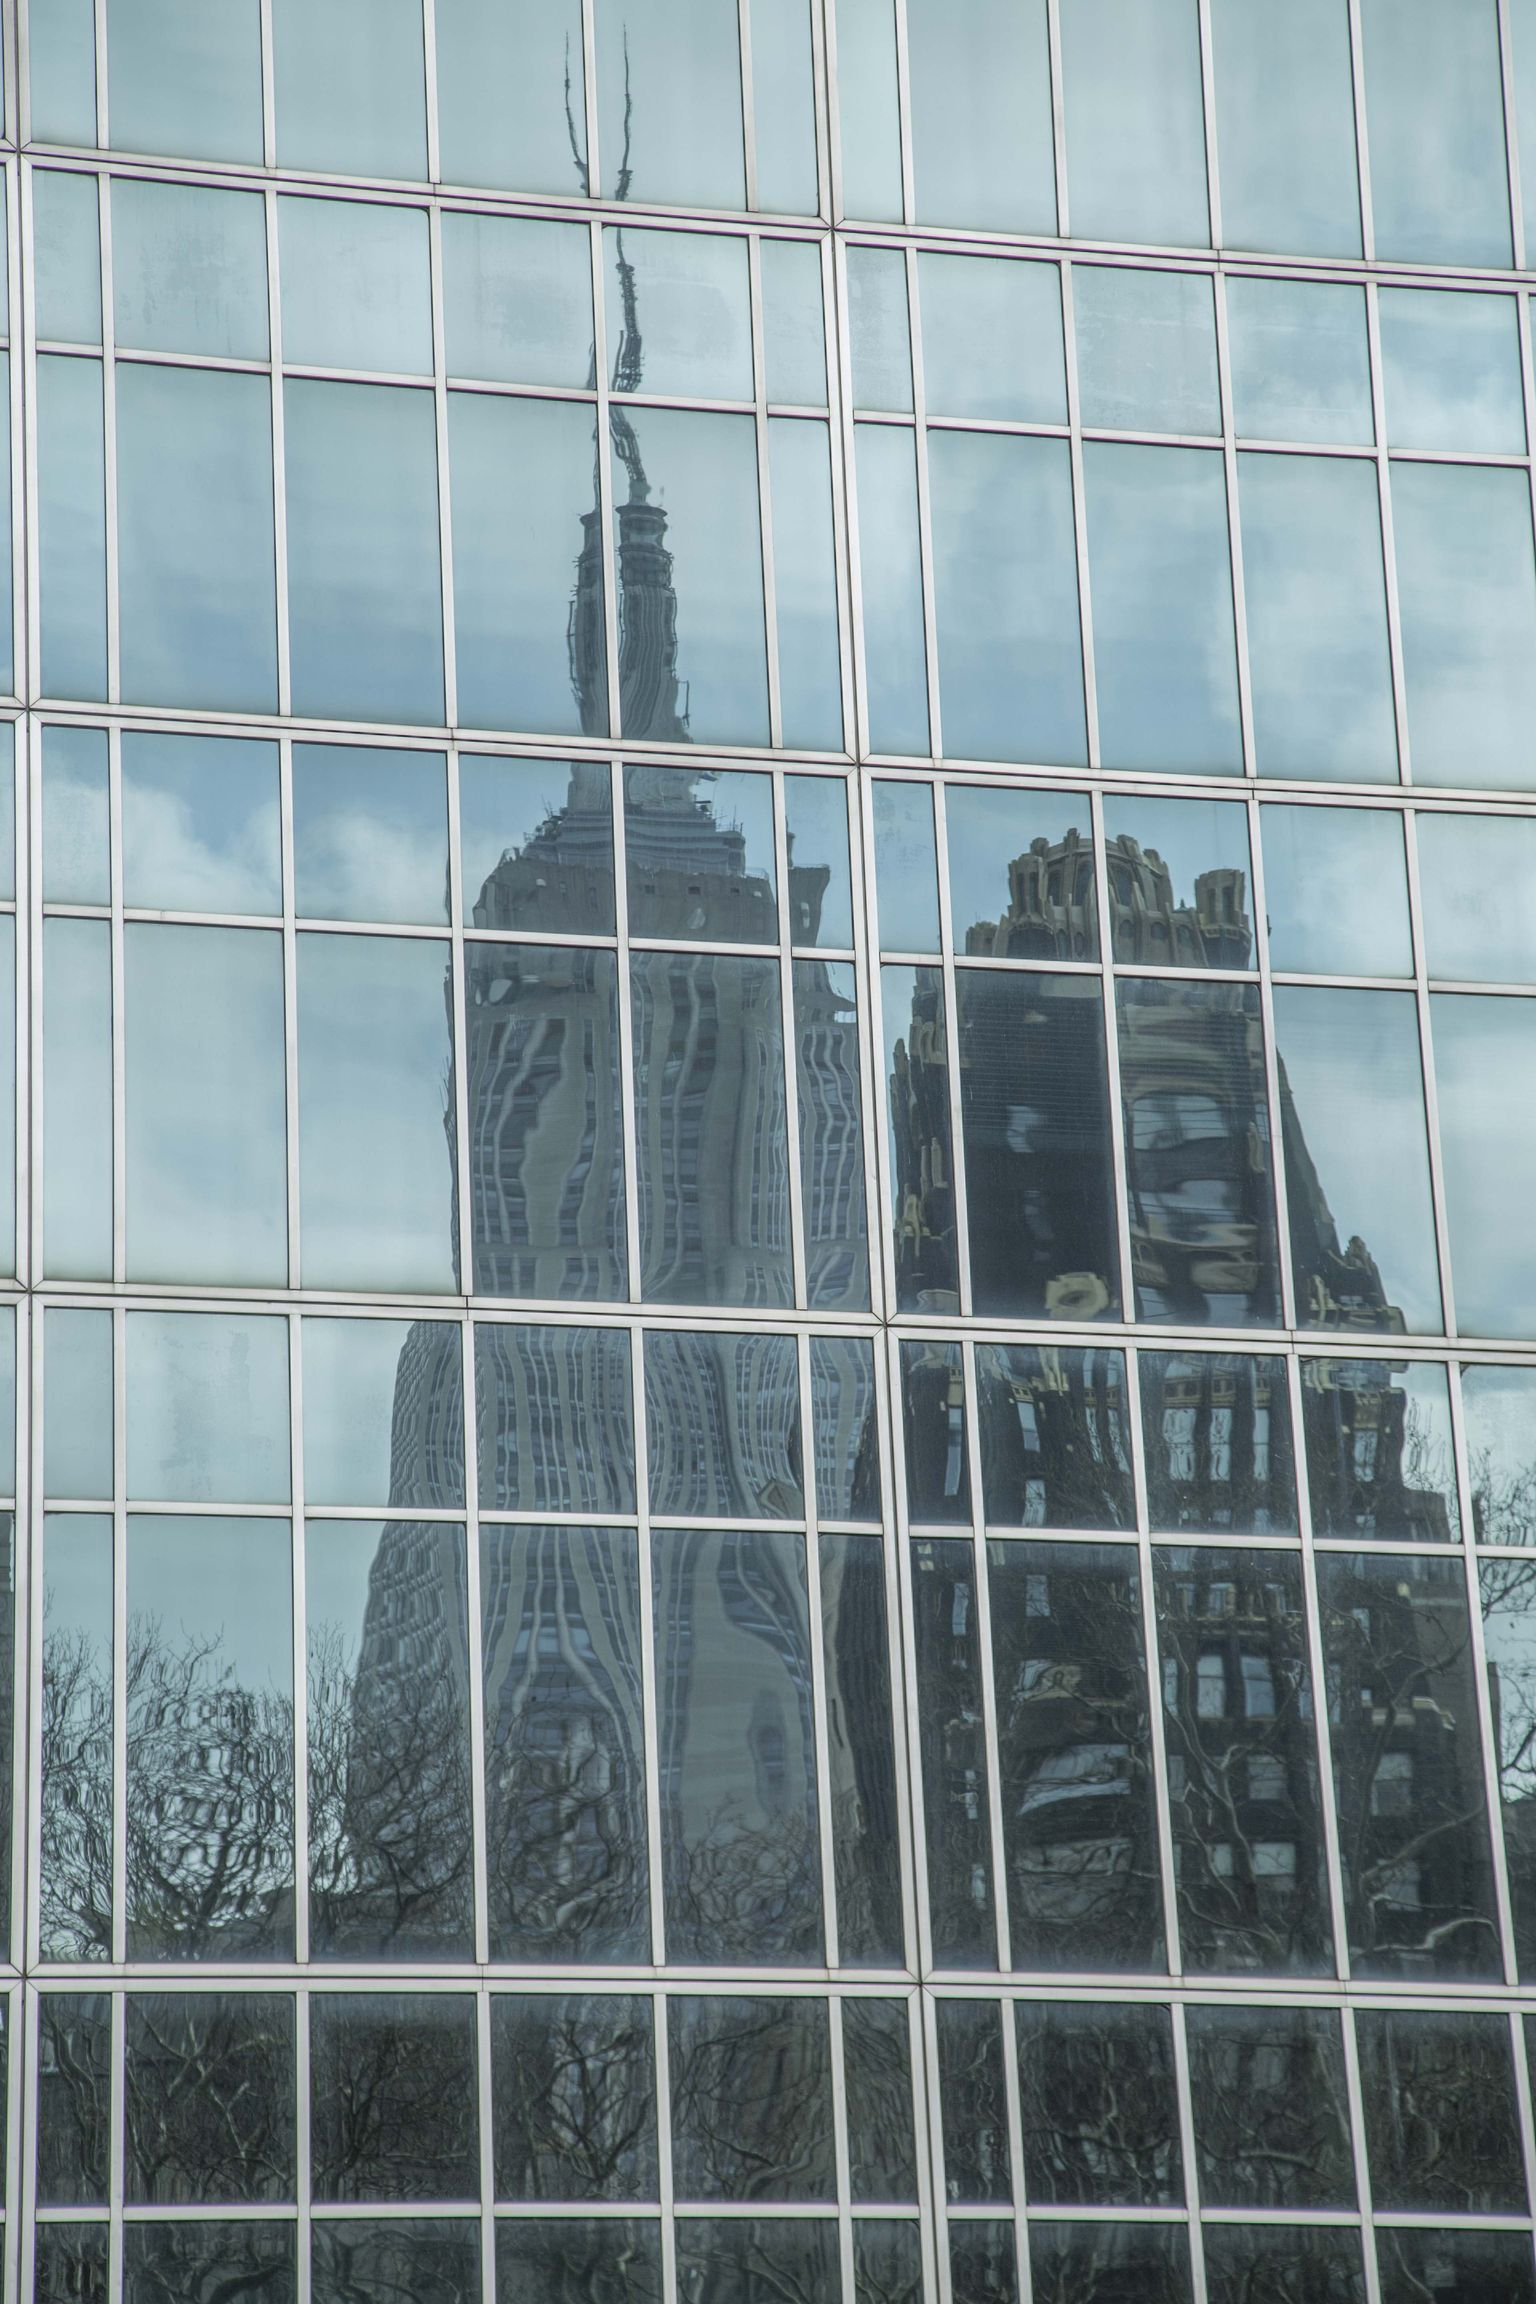 reflection-of-empire-state-building-photo_18118899-1536tall